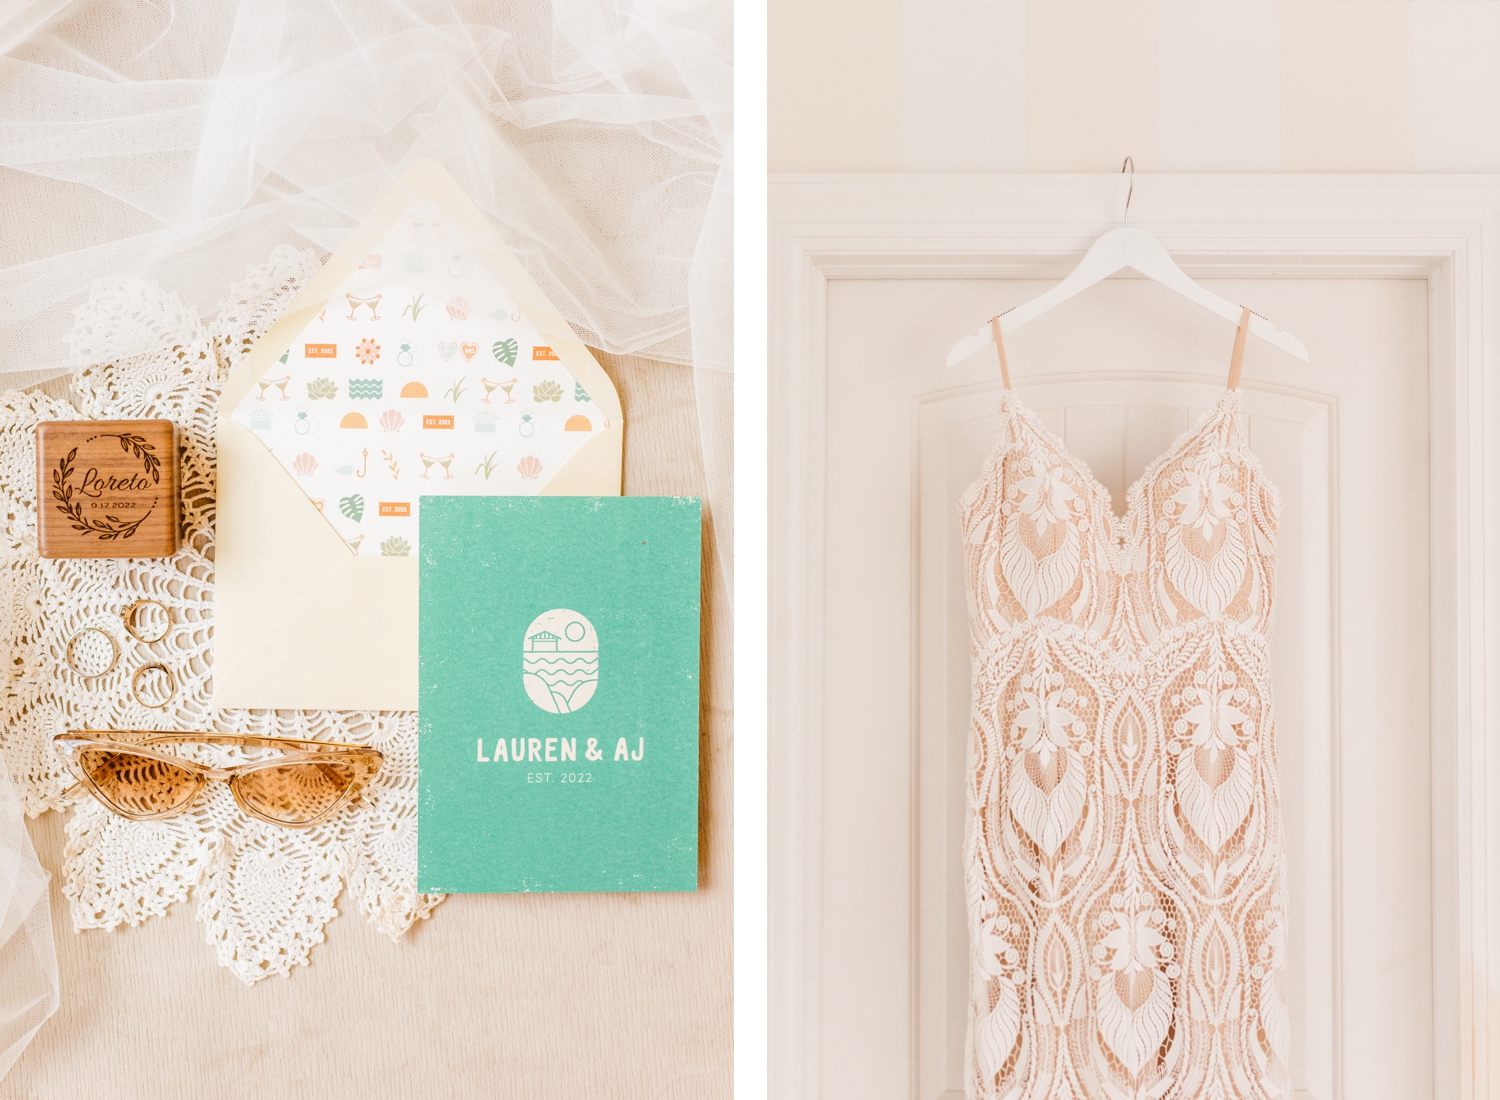 Colorful wedding invitation suite | modern lace wedding dress | Brooke Michelle Photography